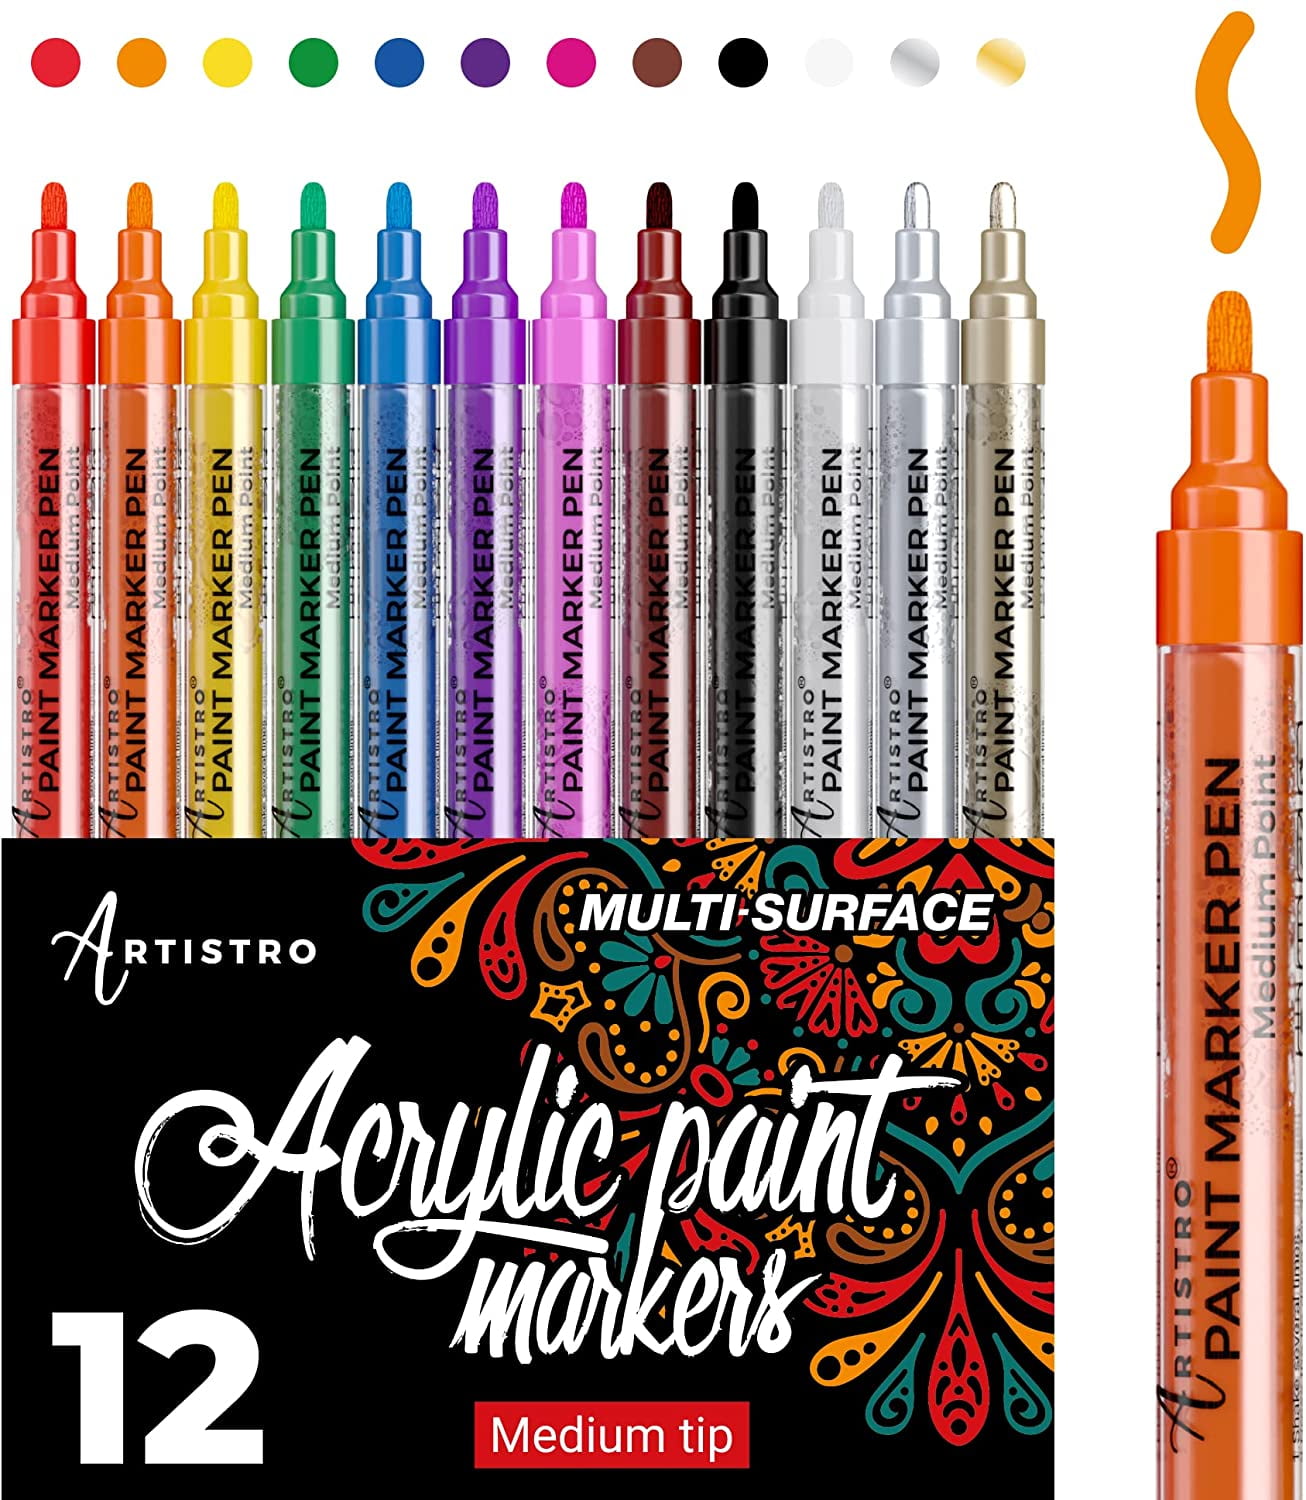 ARTISTRO Acrylic Paint Pens for Rock Painting, Stone, Ceramic, Glass, Wood,  Mugs, Metal, Fabric, Canvas (30 Pack) 28 Assorted Colors + Extra Black 